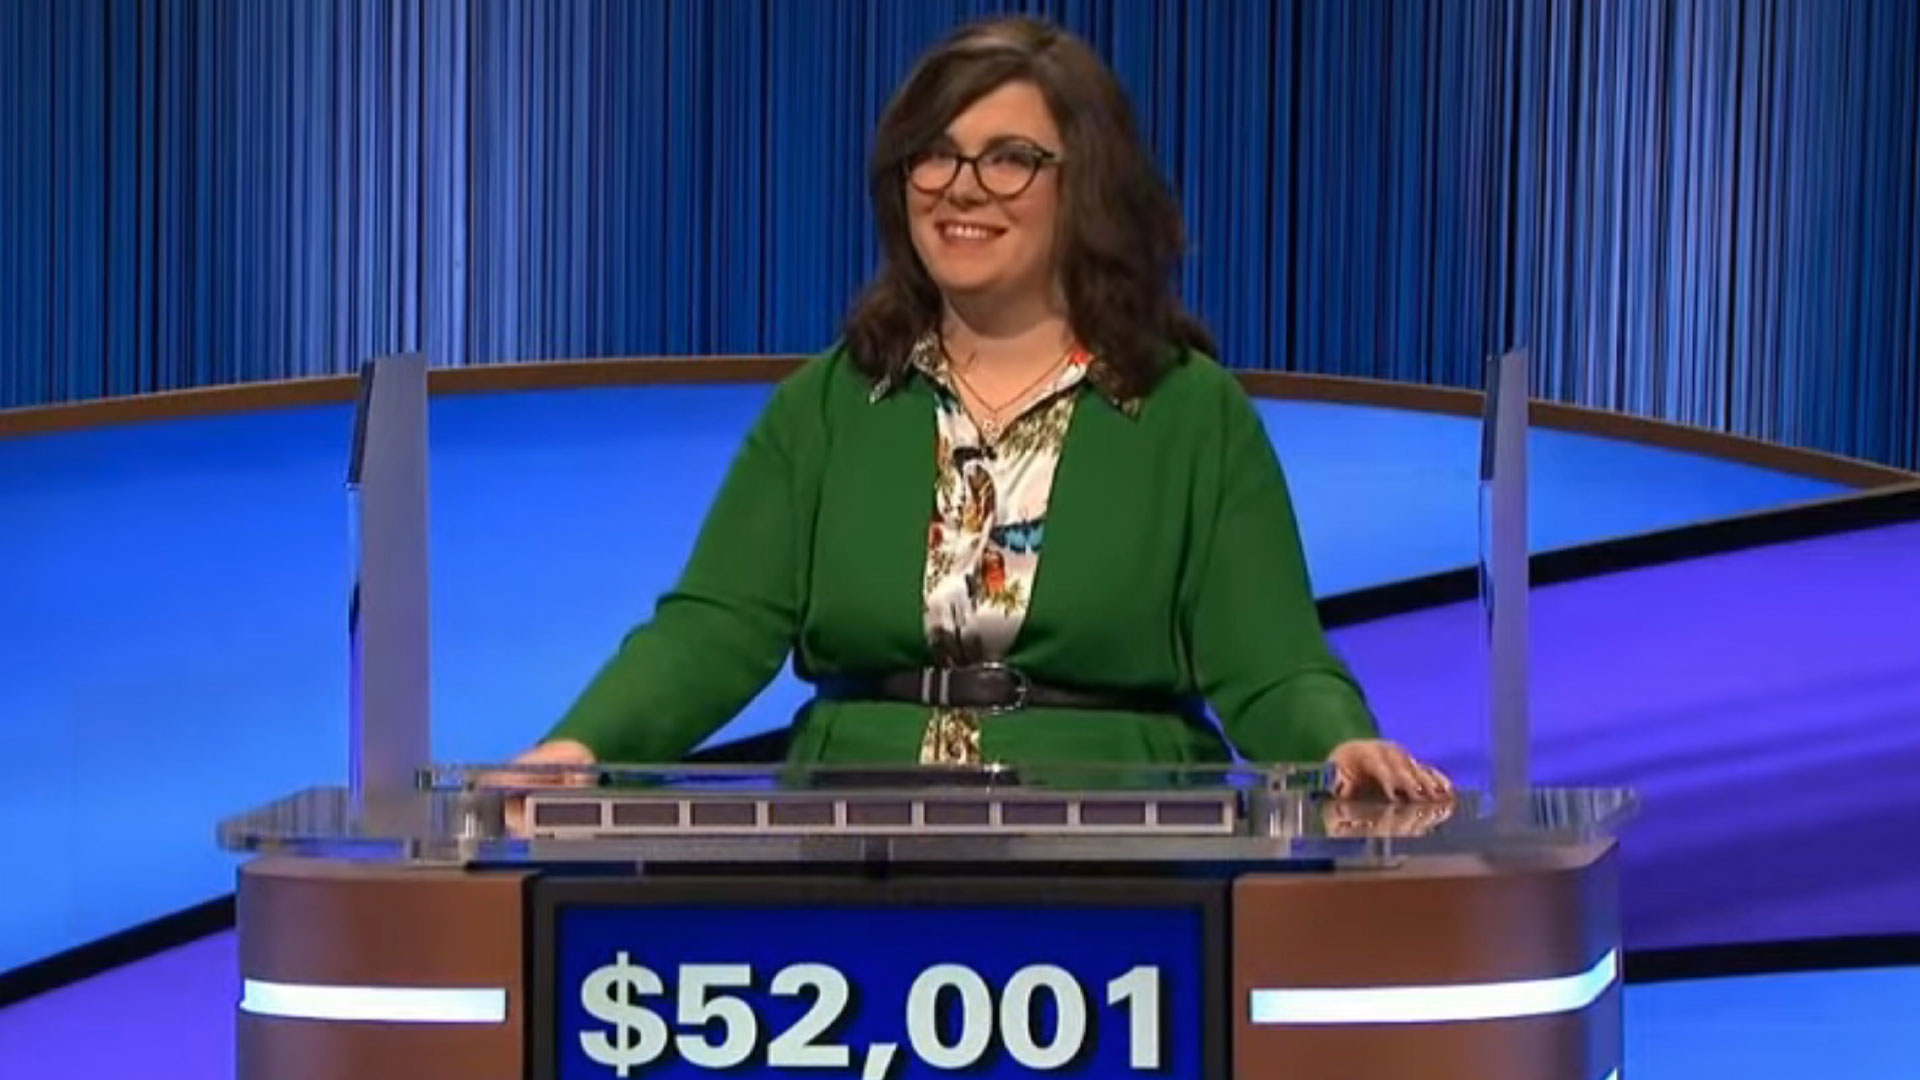 Jeopardy! Champion Victoria Groce Dominates Finals, Leaving Fans Concerned for Opponent’s Quiet Performance